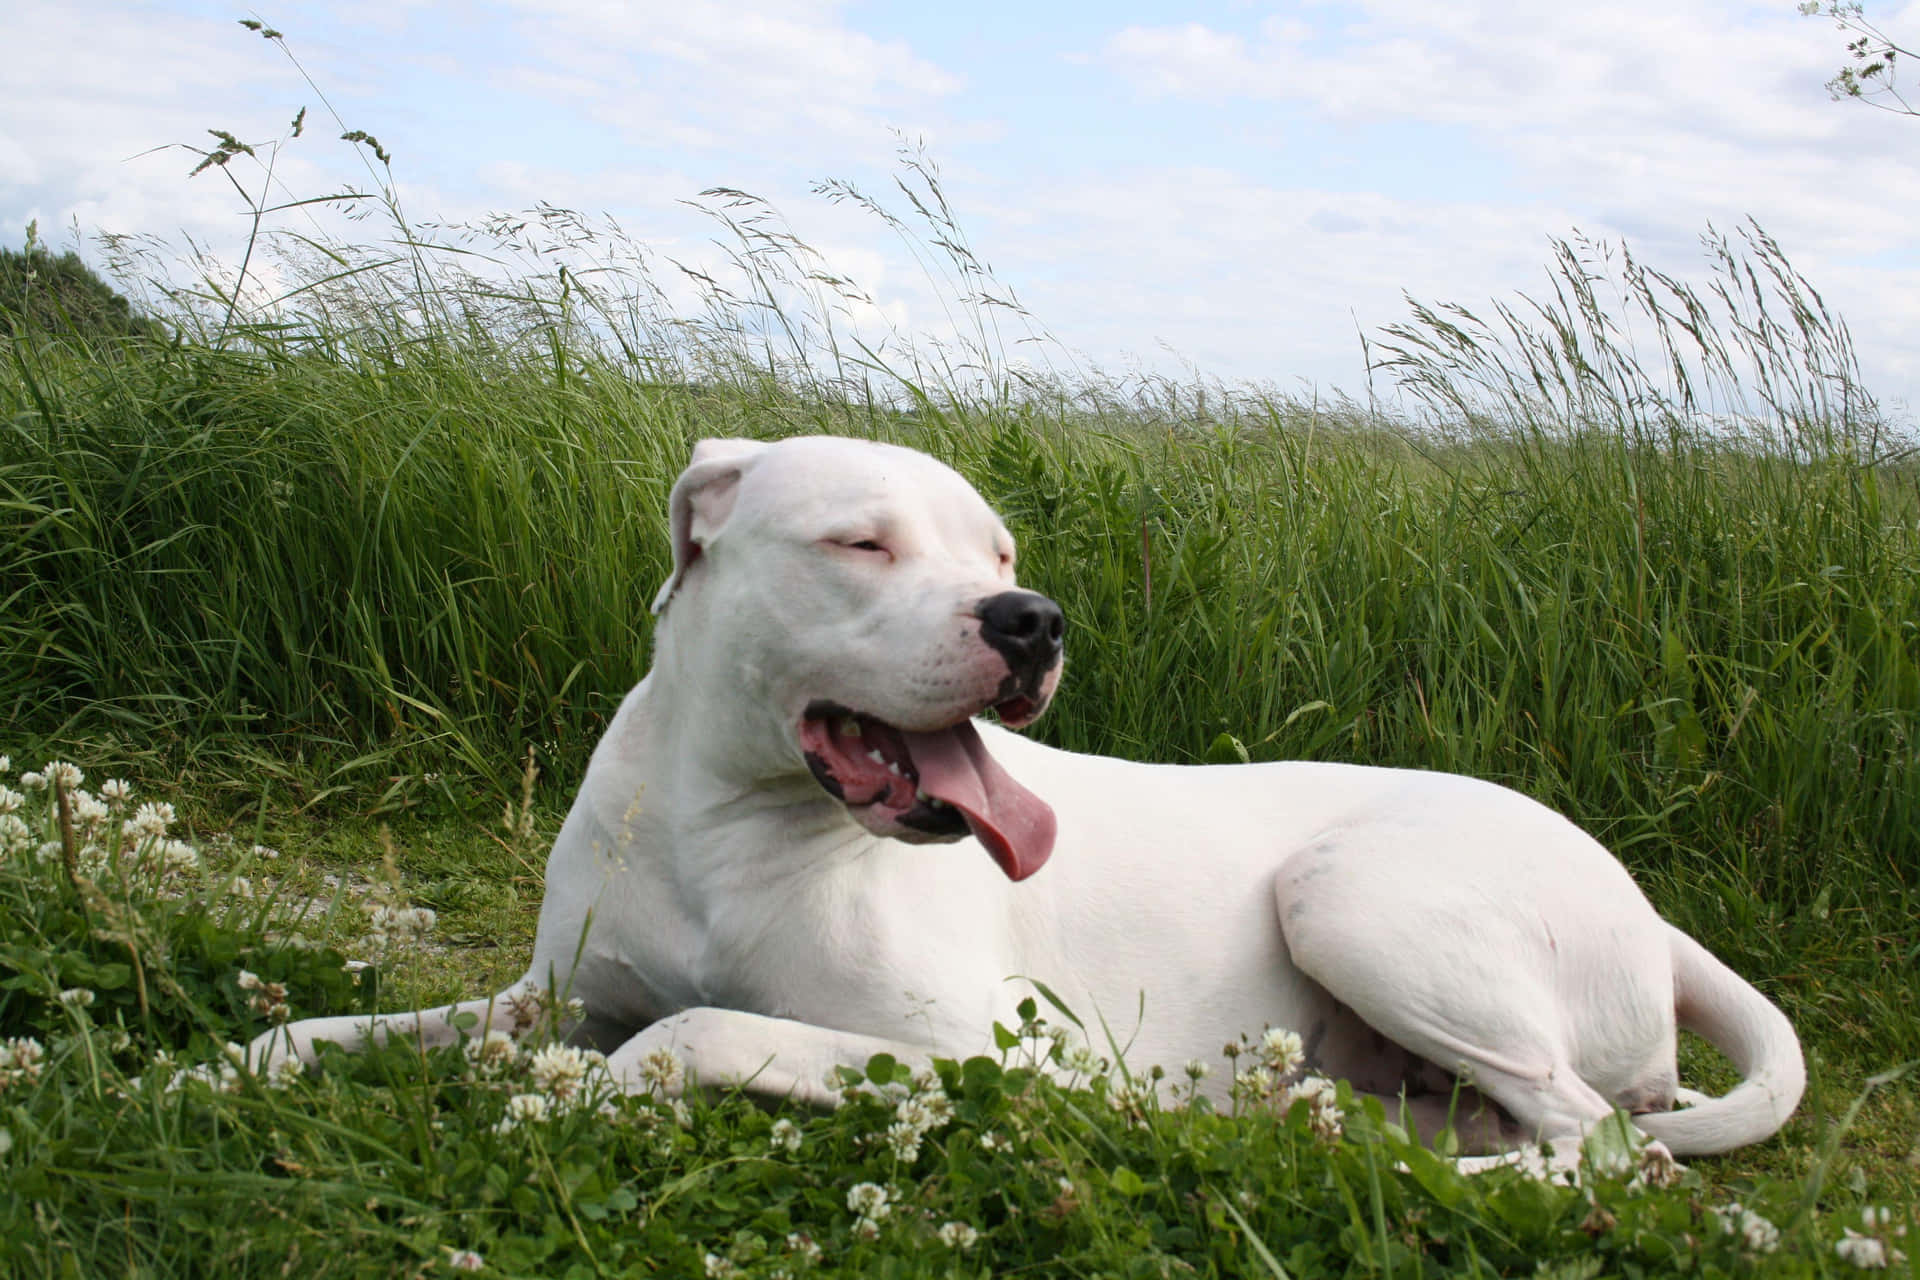 "The strong and loyal Dogo Argentino"